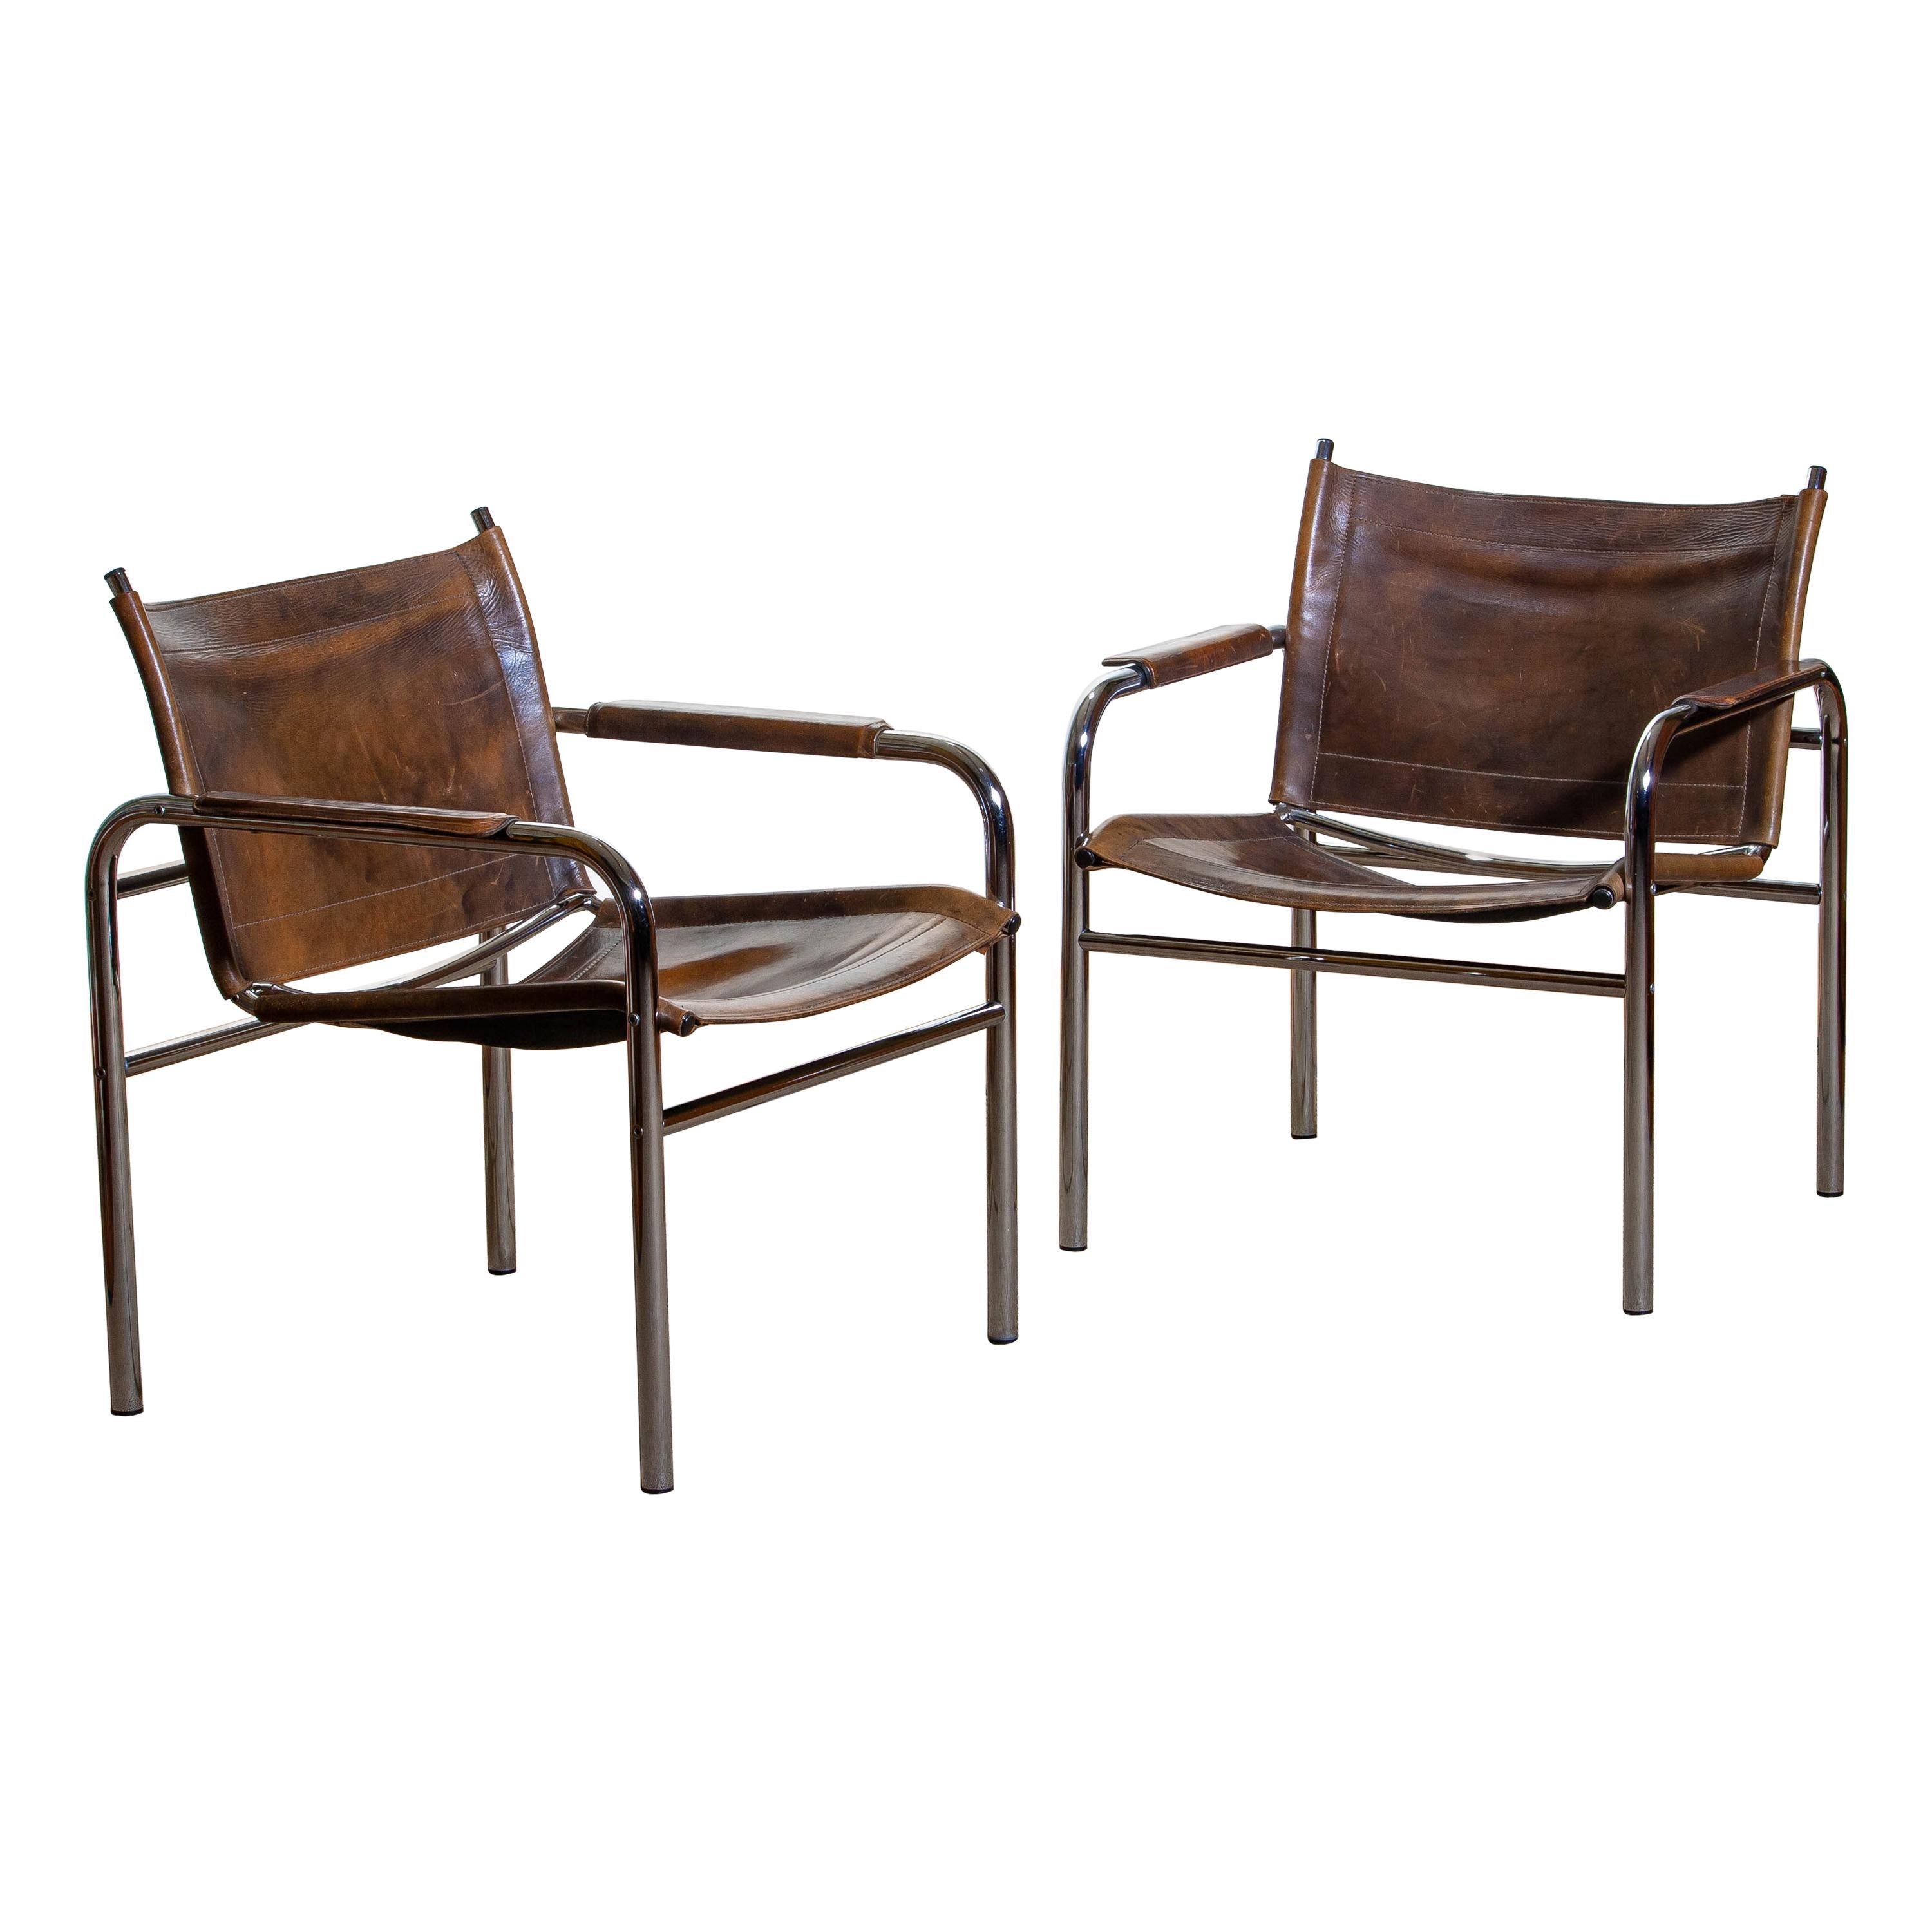 Mid-Century Modern 1980s, Pair of Leather and Tubular Steel Armchairs by Tord Bjorklund, Sweden